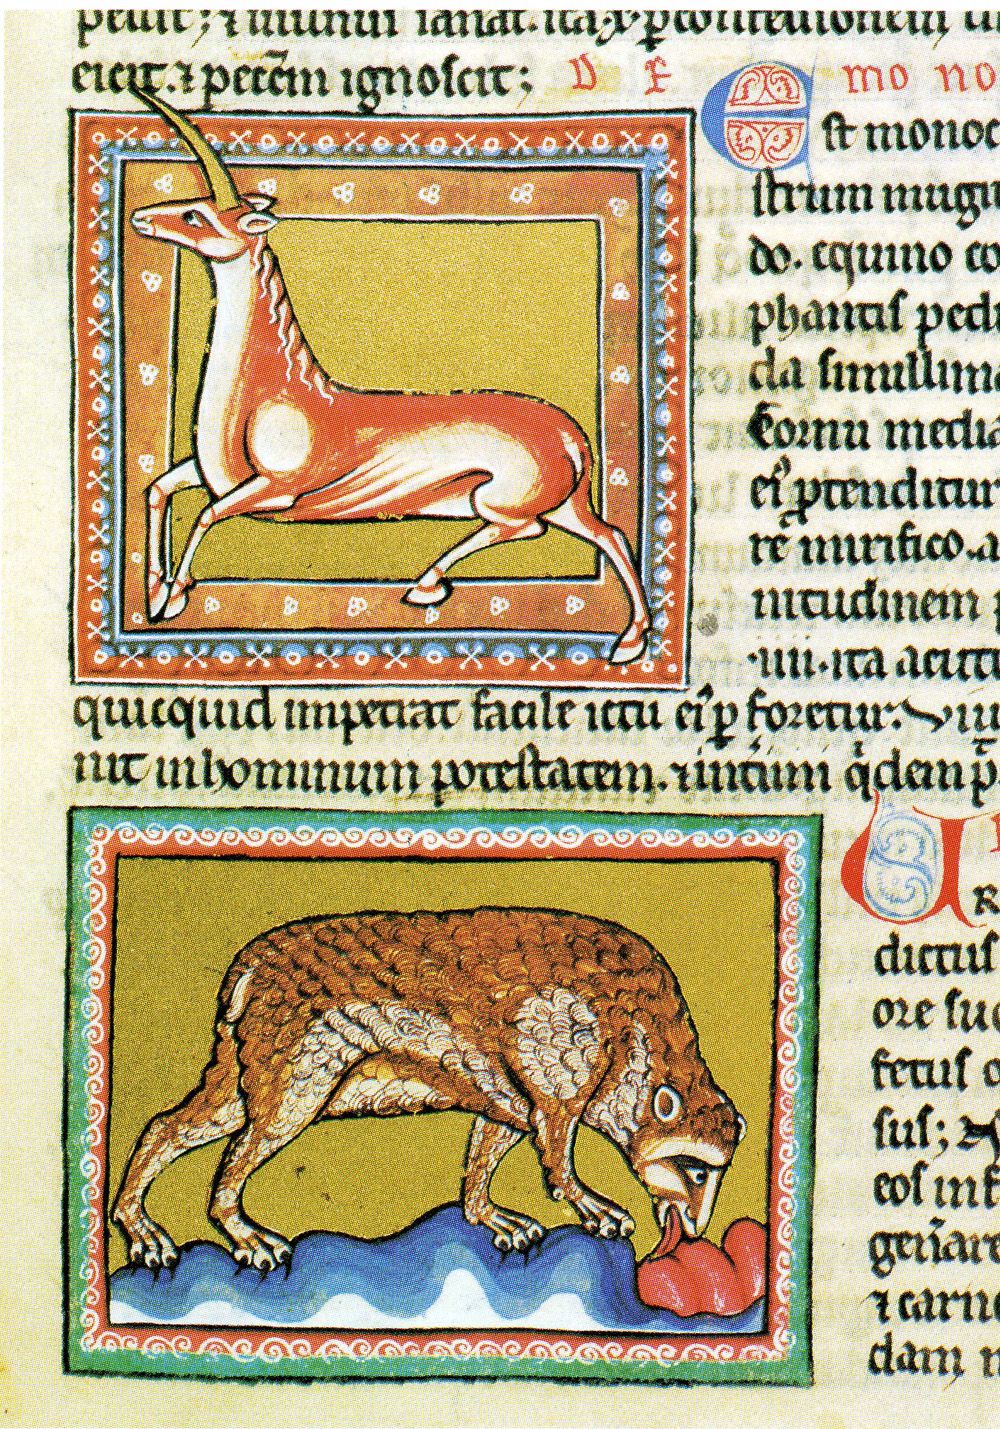 A page from a medieval illuminated manuscript with illustrations of a strange-looking unicorn and an even-stranger looking cat with a somewhat human face, licking something red.